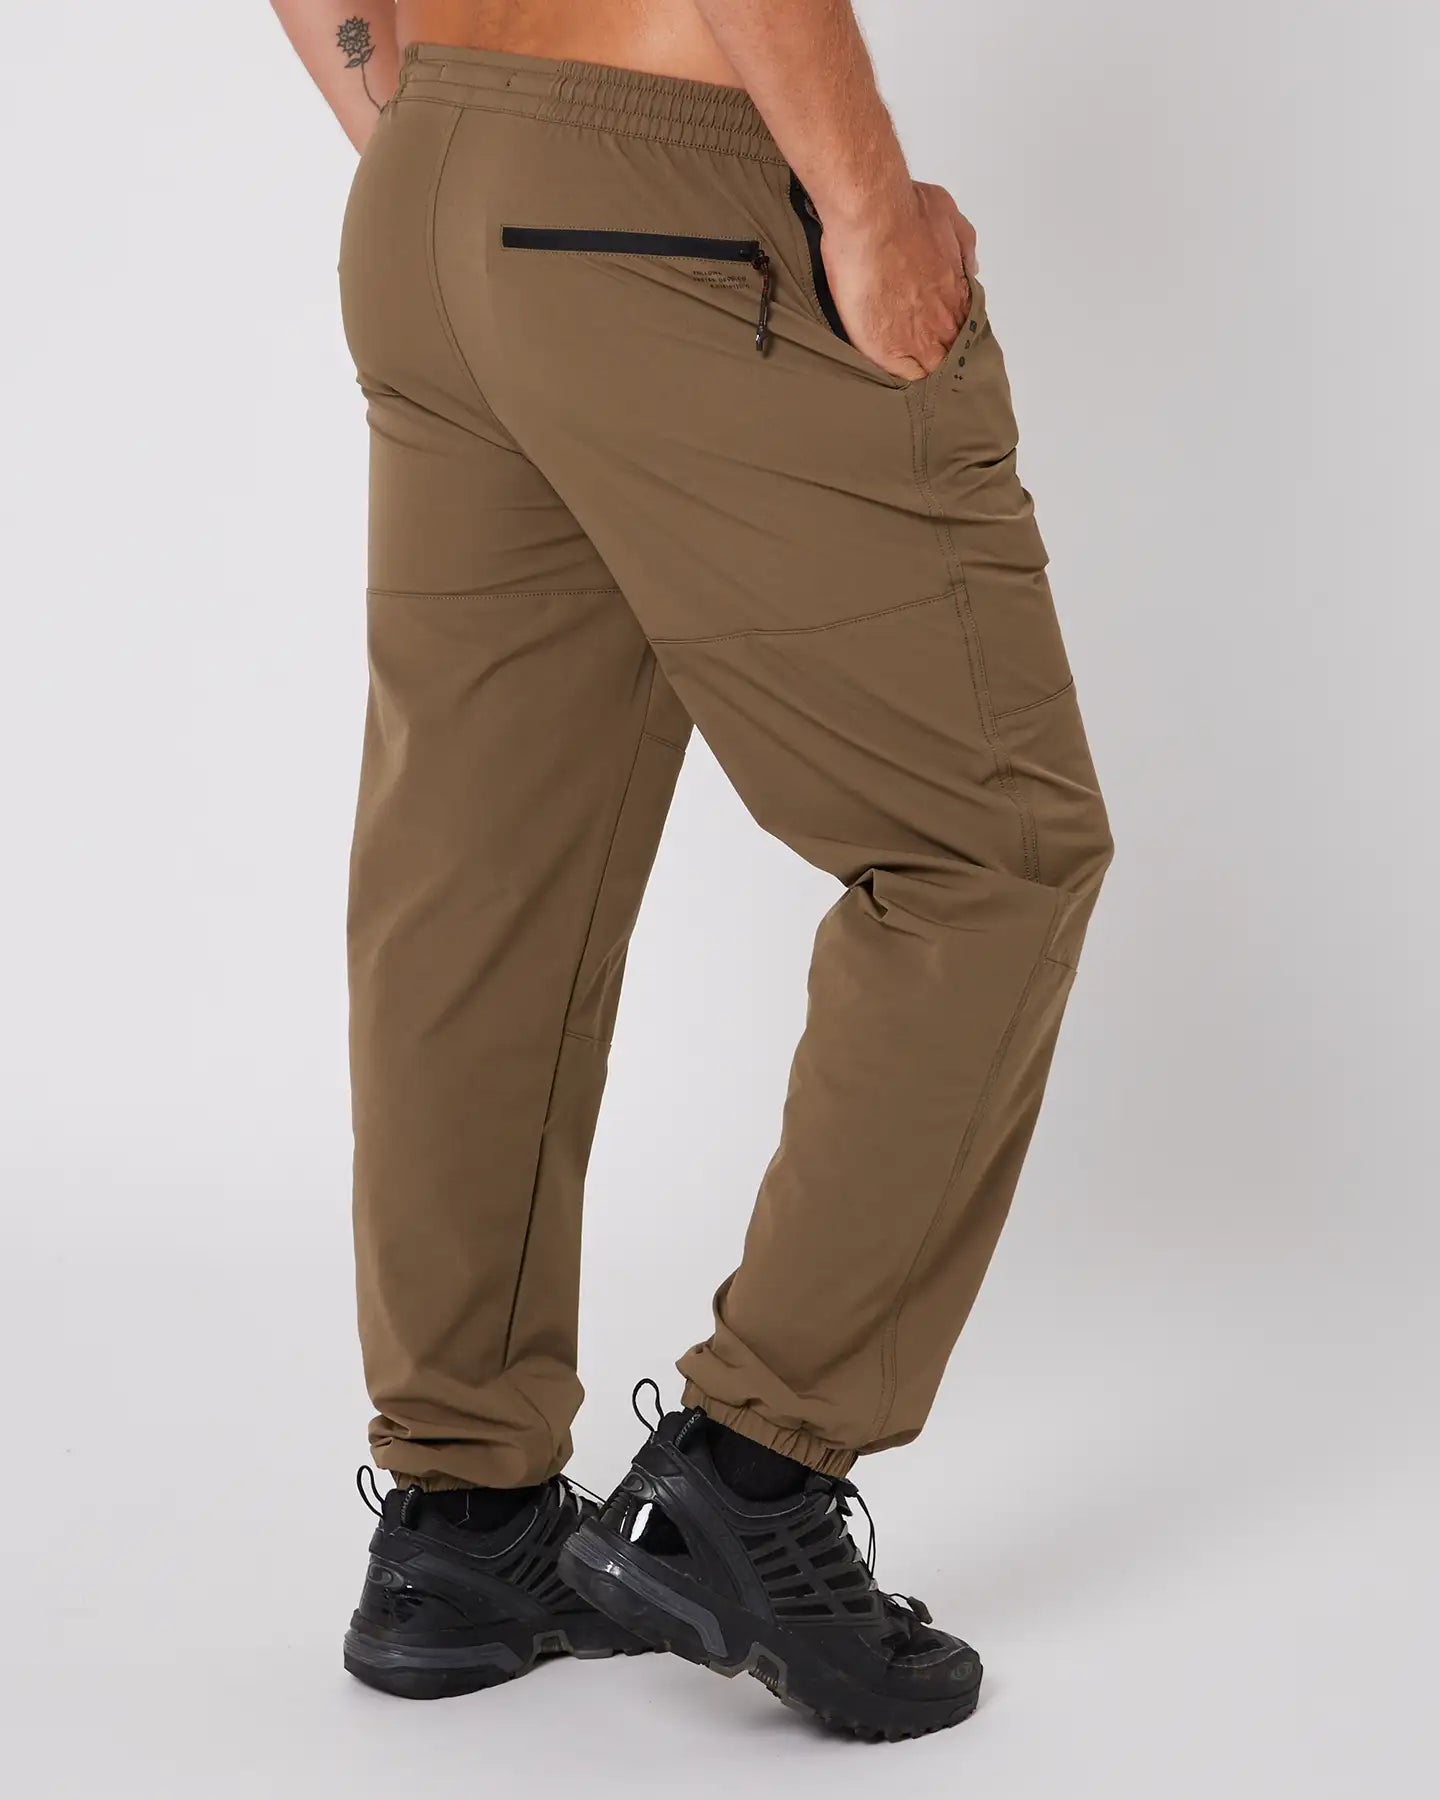 Follow All Day Pants - Deep Taupe 6